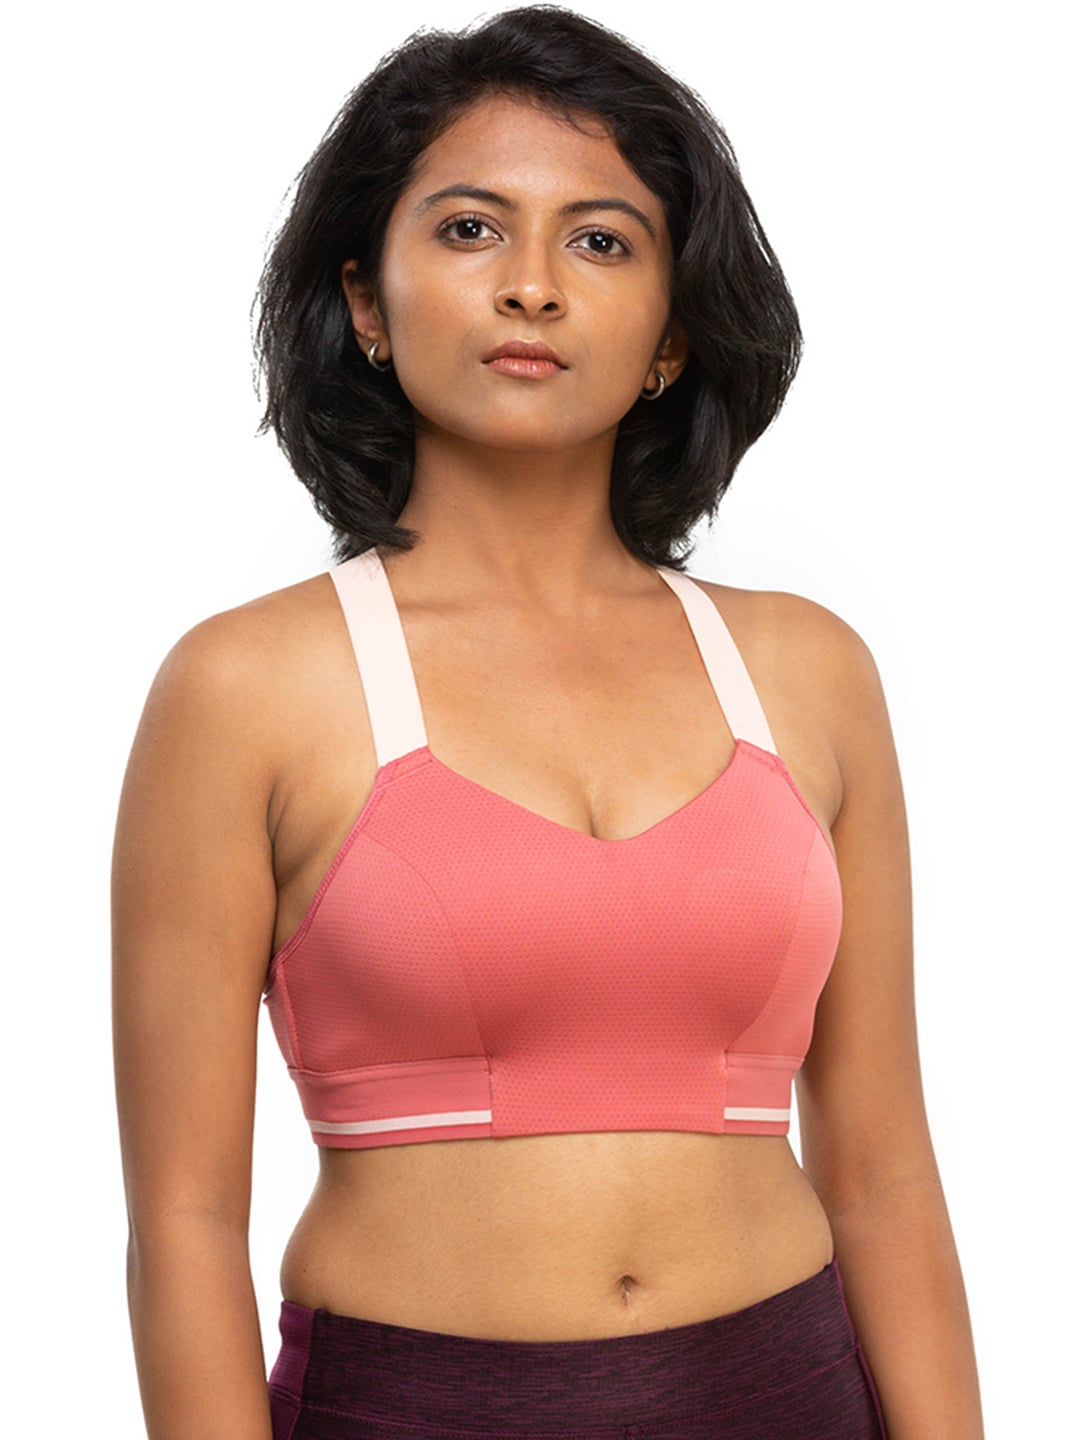 Domyos by Decathlon Women Desert Rose Medium Support Padded Sports Bra  Price in India, Full Specifications & Offers